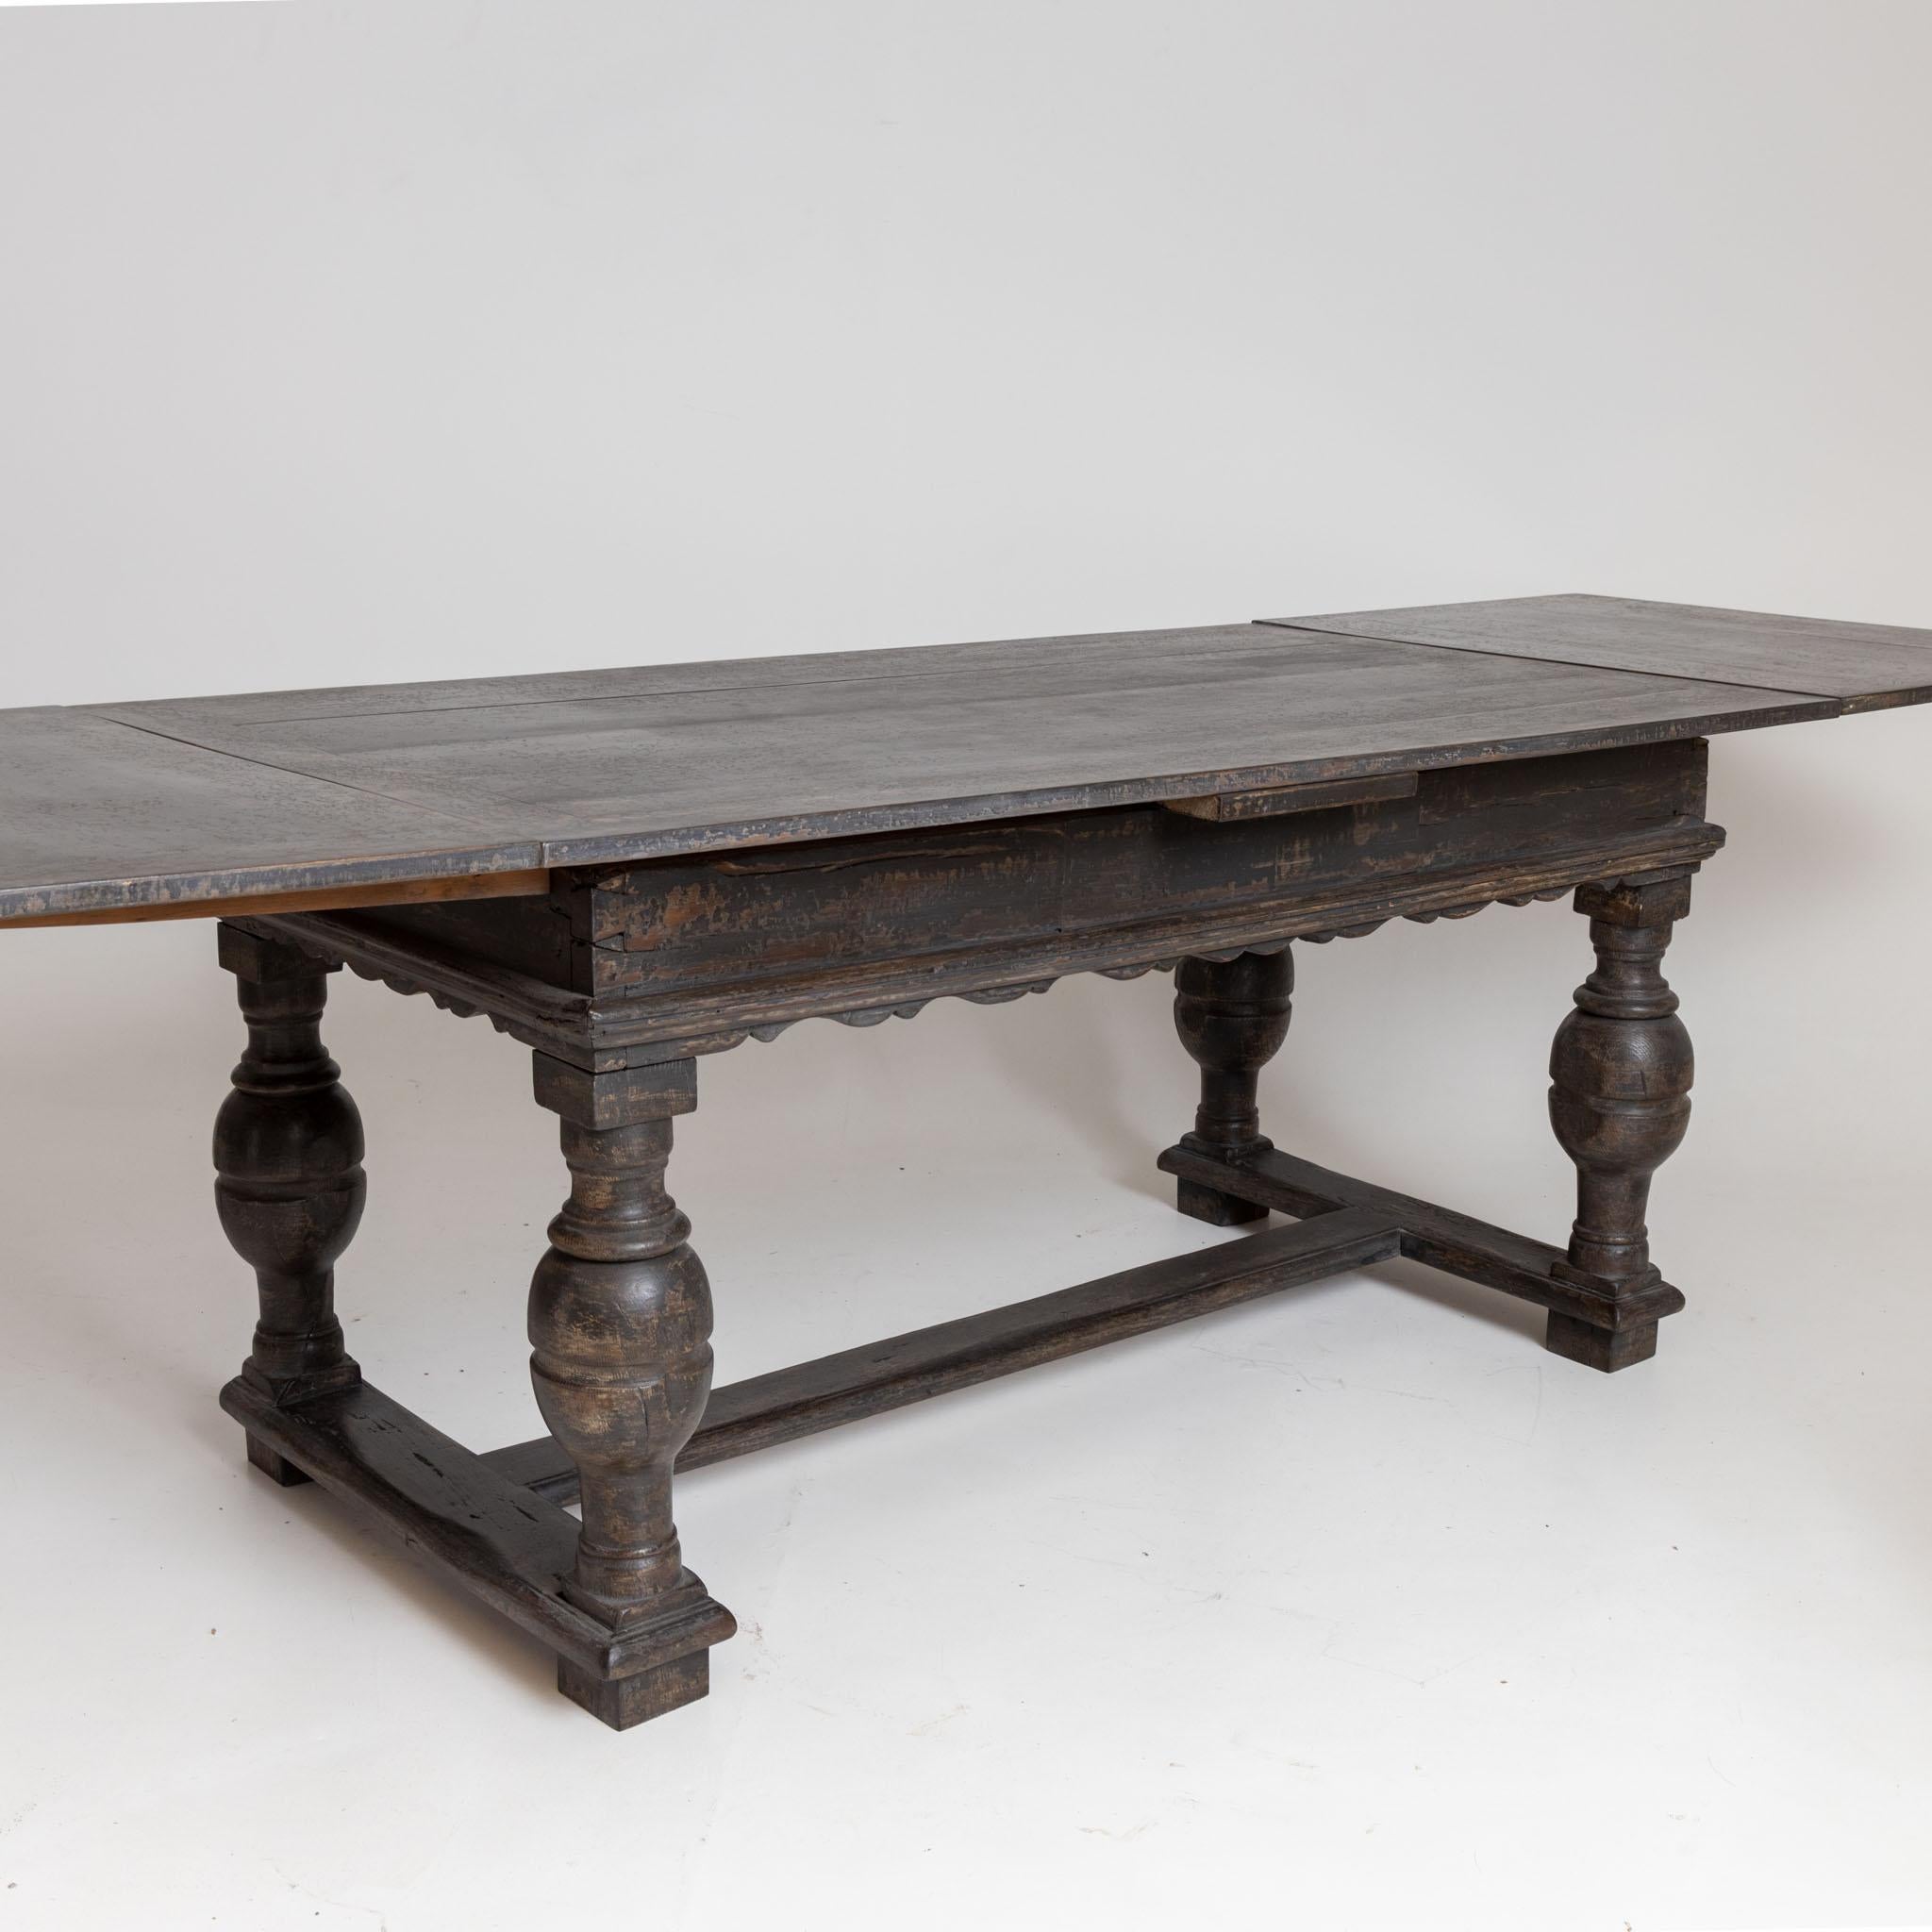 German Baroque-Style Extension Table, 18th Century